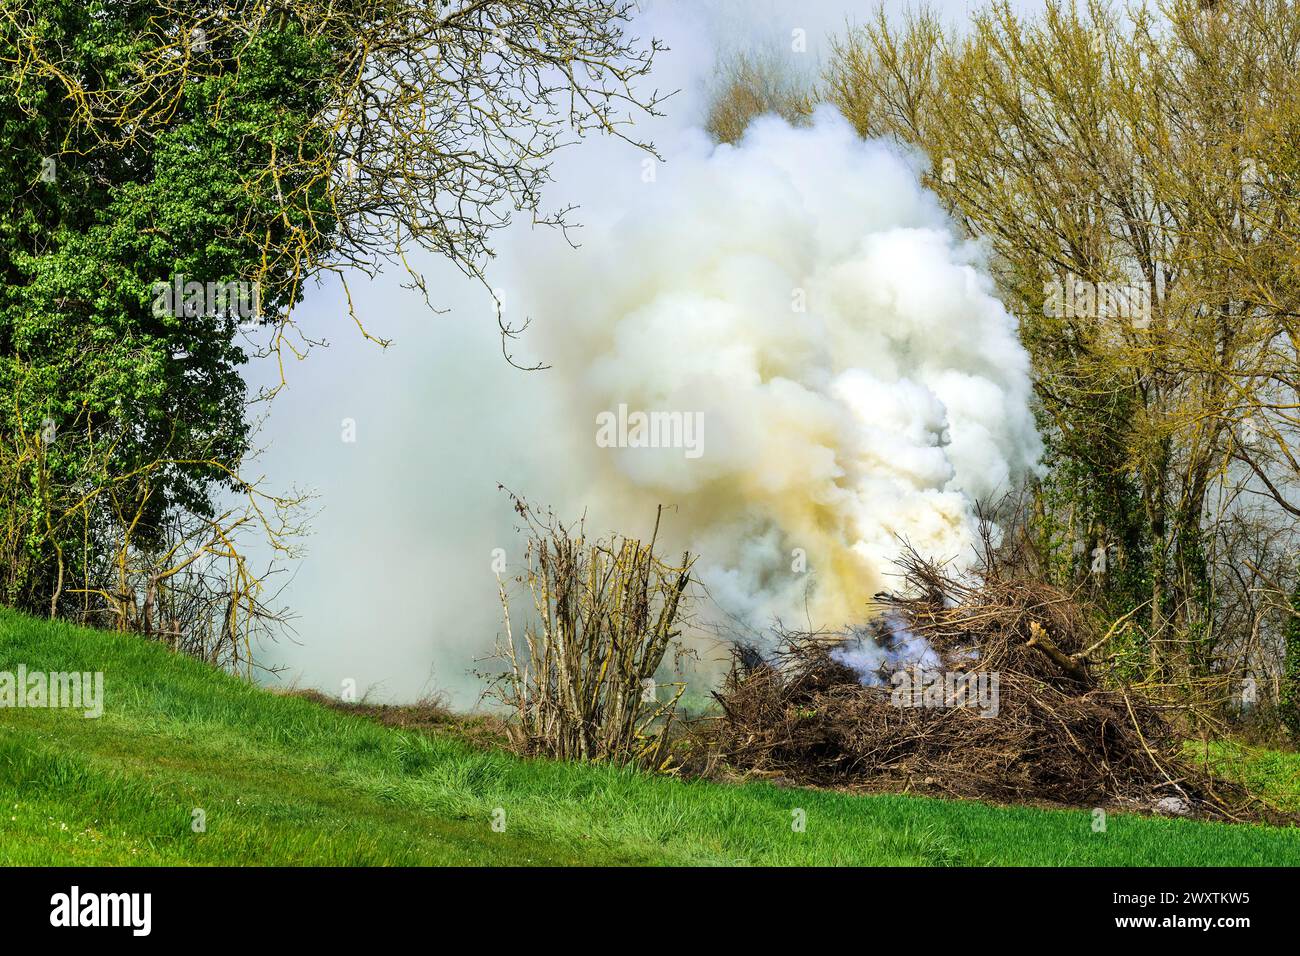 Waste tree branches being burned on farmland with lot of white smoke - central France. Stock Photo